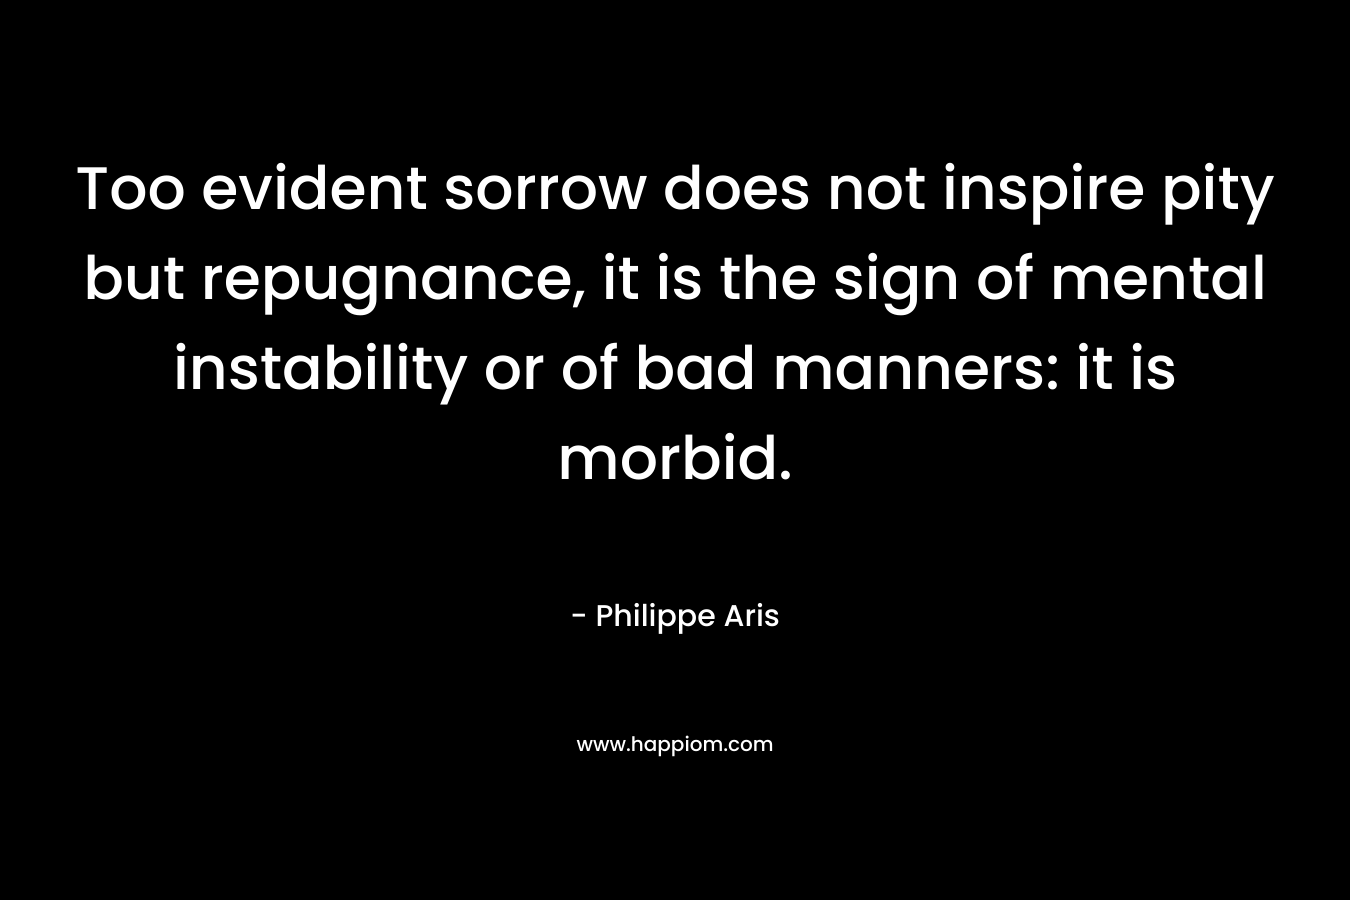 Too evident sorrow does not inspire pity but repugnance, it is the sign of mental instability or of bad manners: it is morbid. – Philippe Aris